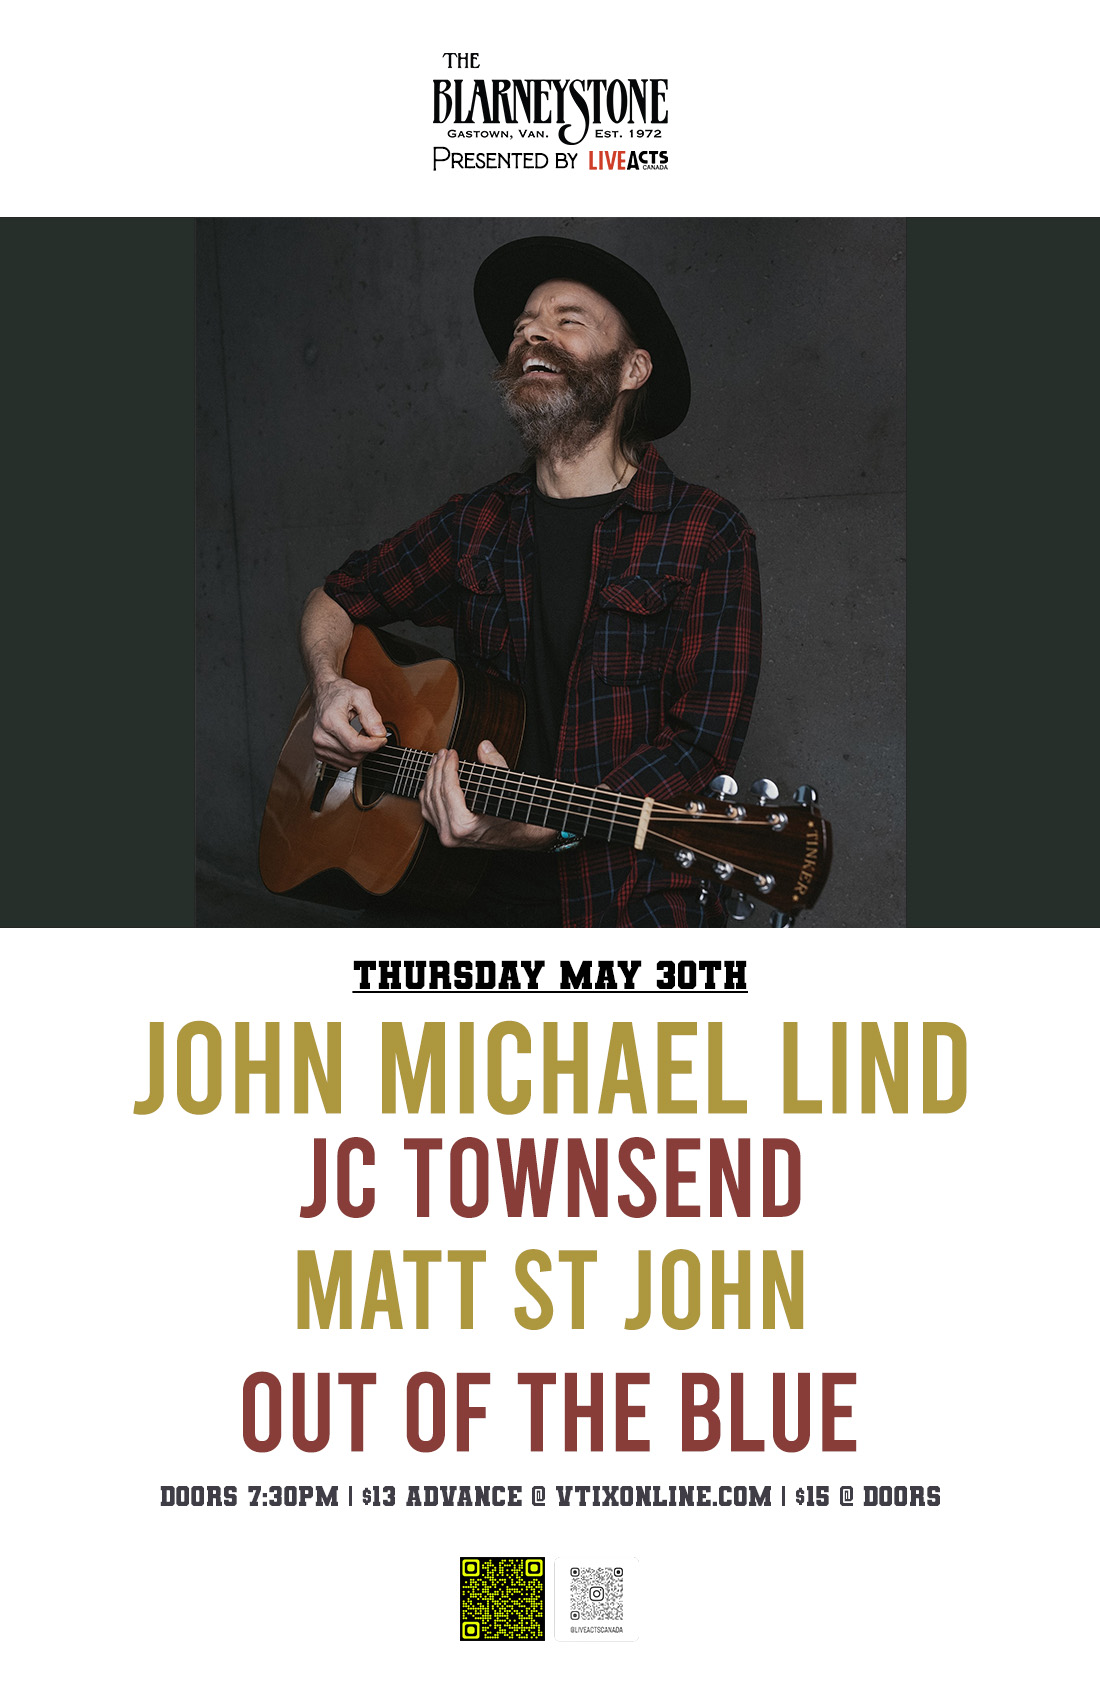 John Michael Lind w/ JC Townsend, Matthew St John and Out of the BLUE